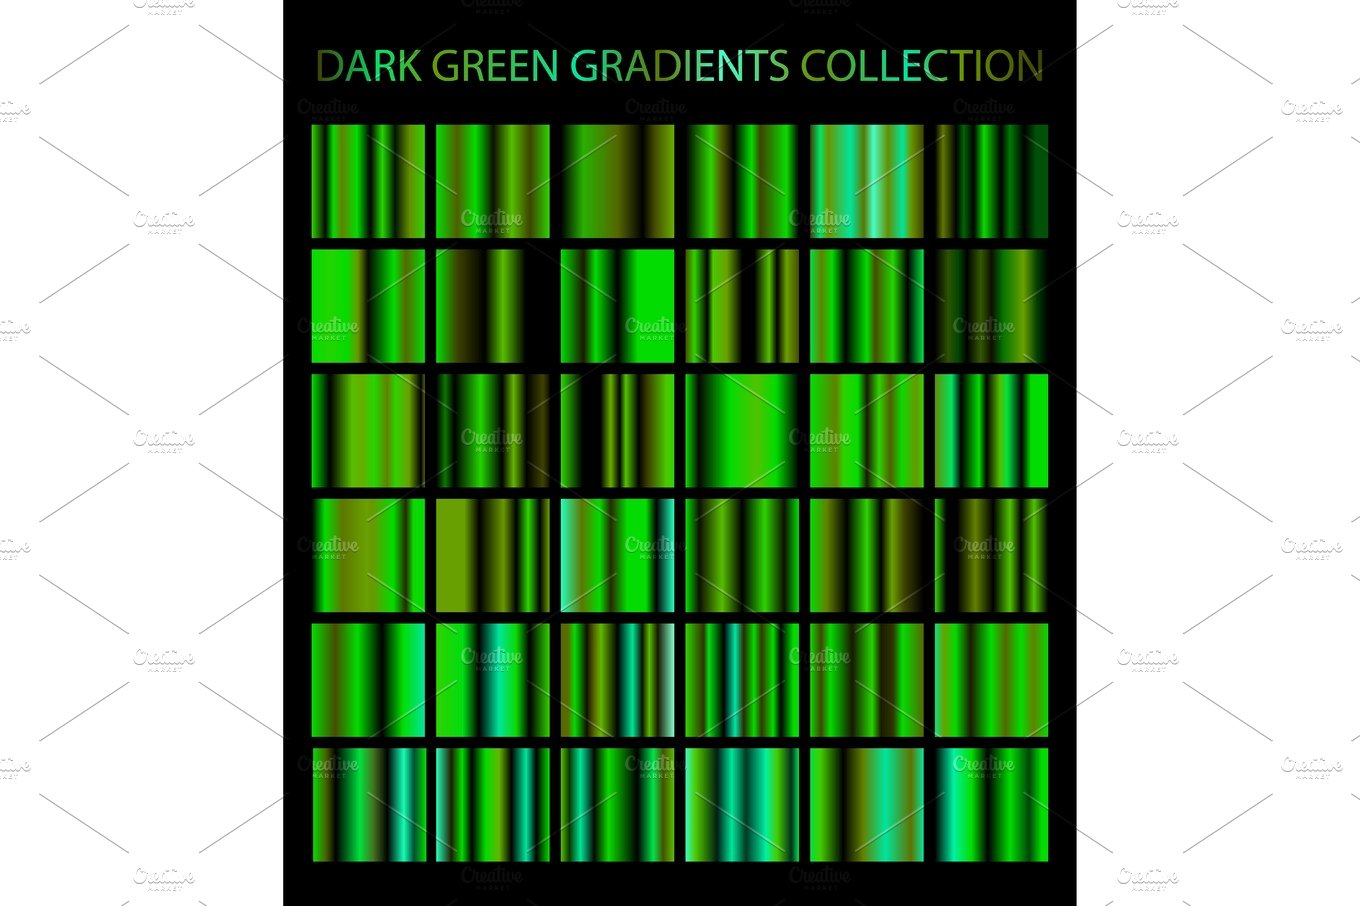 Dark green gradients collection. cover image.